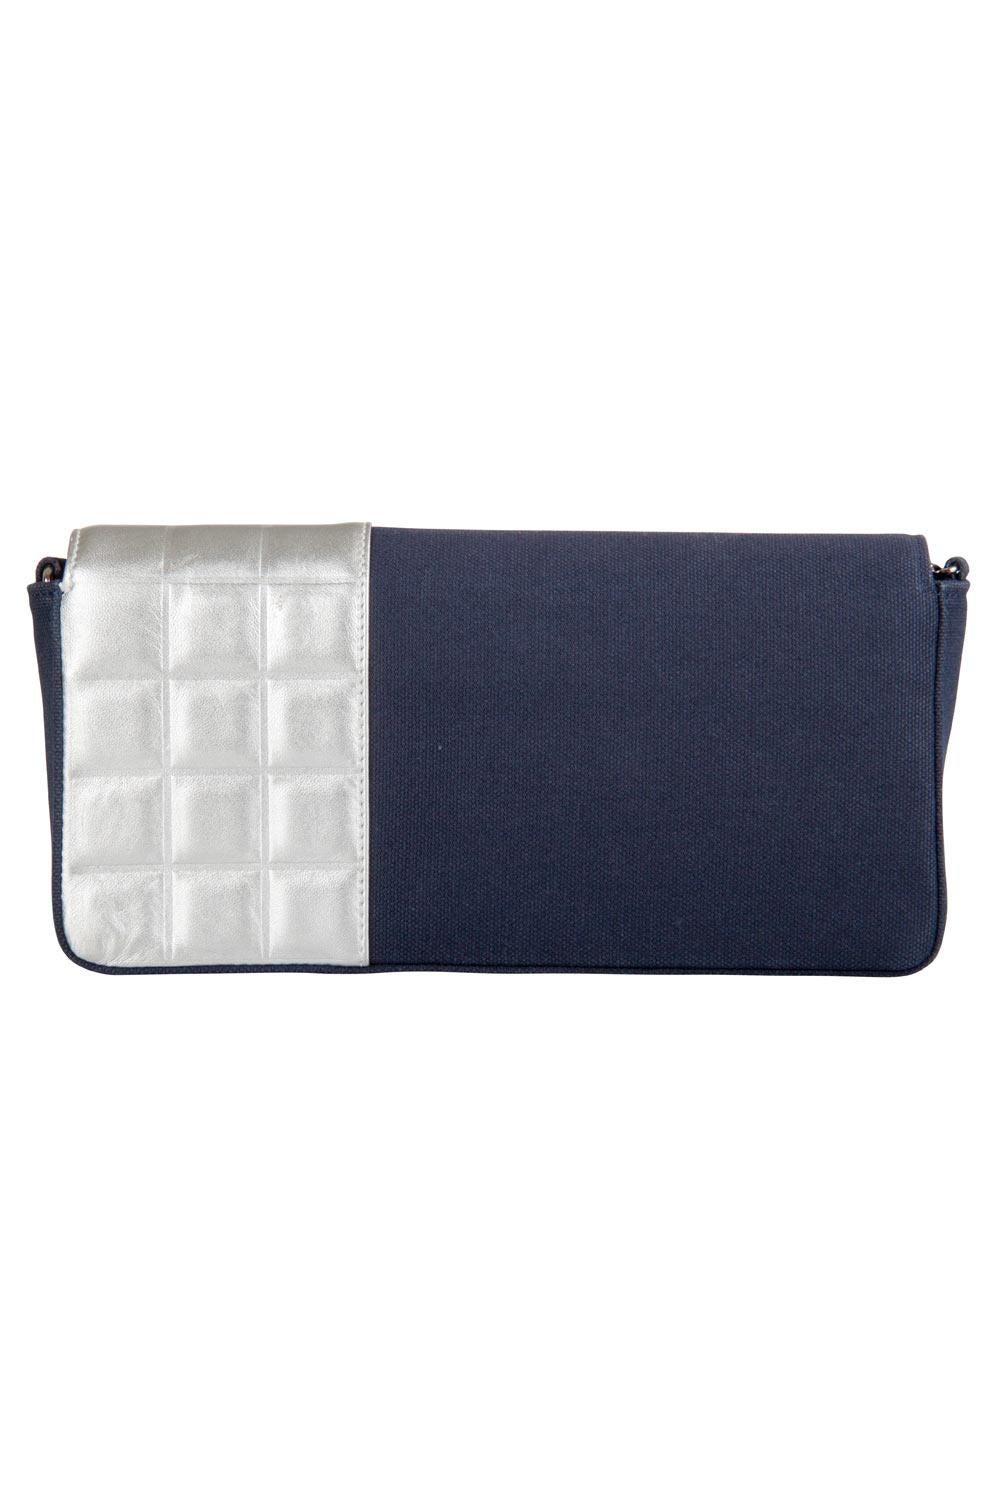 This signature No.5 flap bag showcases everything we know and love about Chanel. The blue canvas exterior is decorated with a white quilted leather panel with a large ‘5’ that pays tribute to the popular Chanel No.5 perfume. It also features the